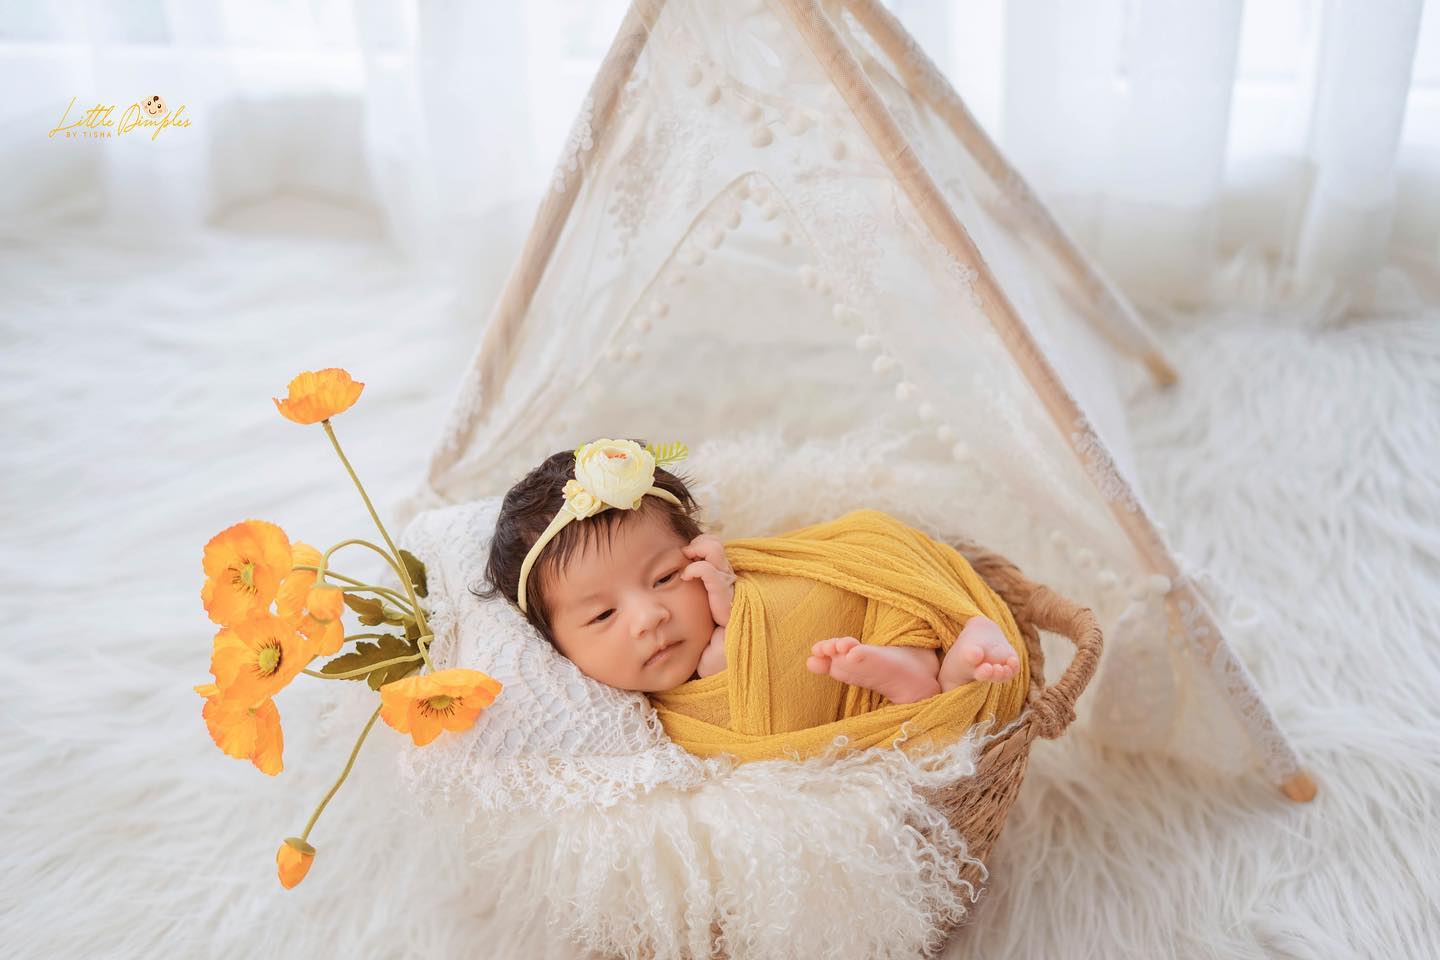 We specialize in elegant newborn photography and baby photography. If you are looking for baby photography or Baby photographers Bangalore, contact us now!